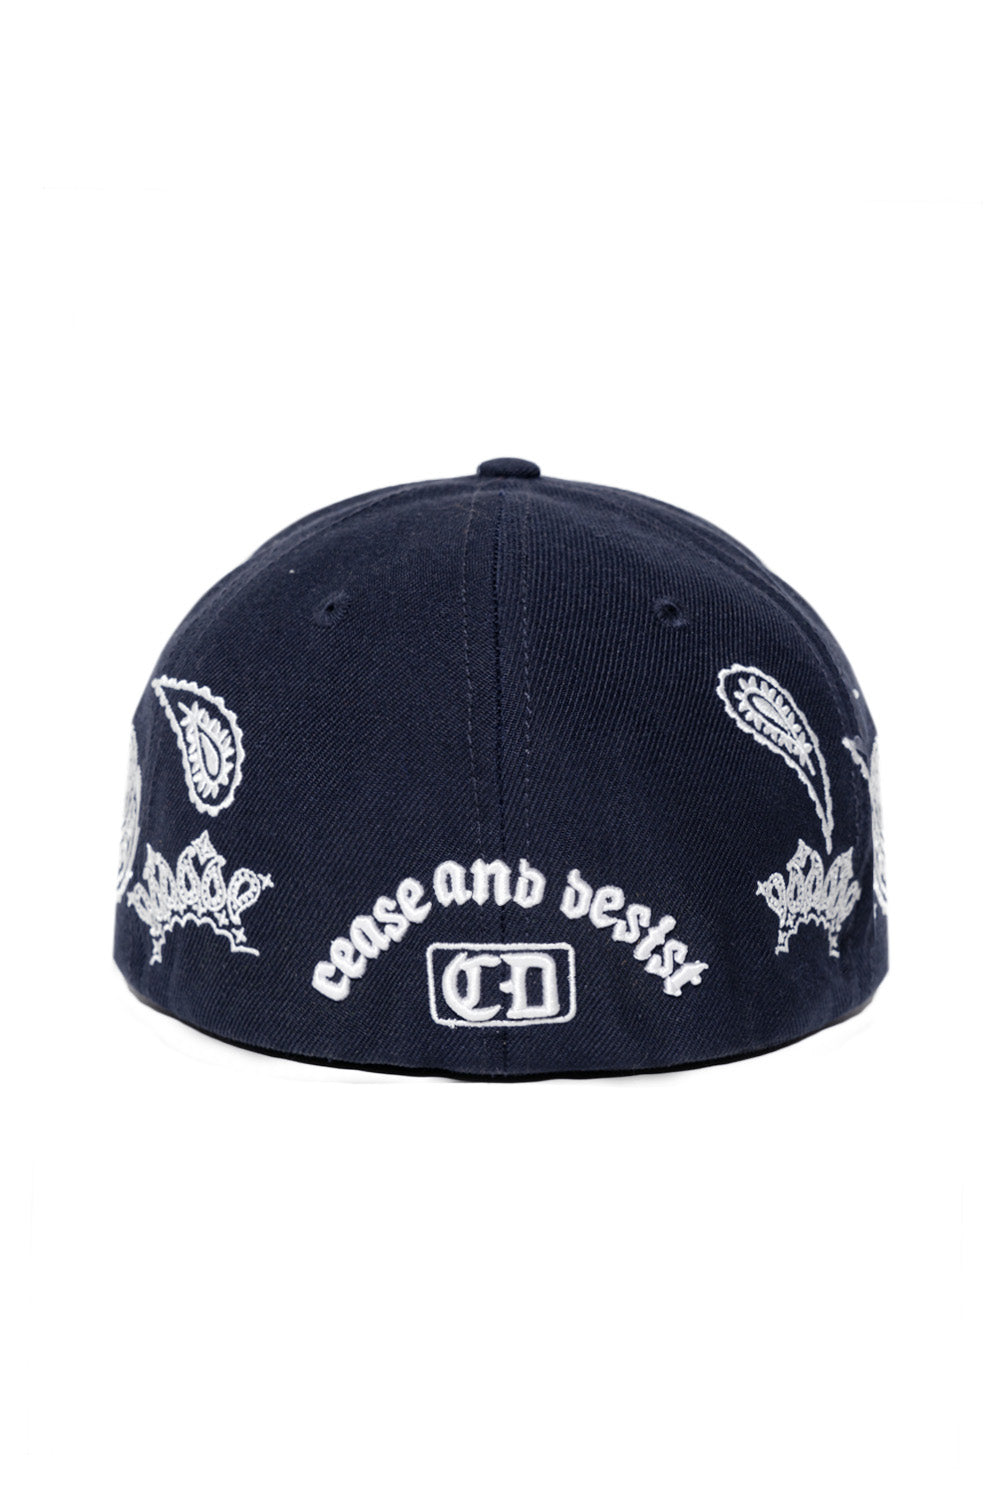 PAISLEY CITY TOUR FITTED (NAVY NEW YORK)